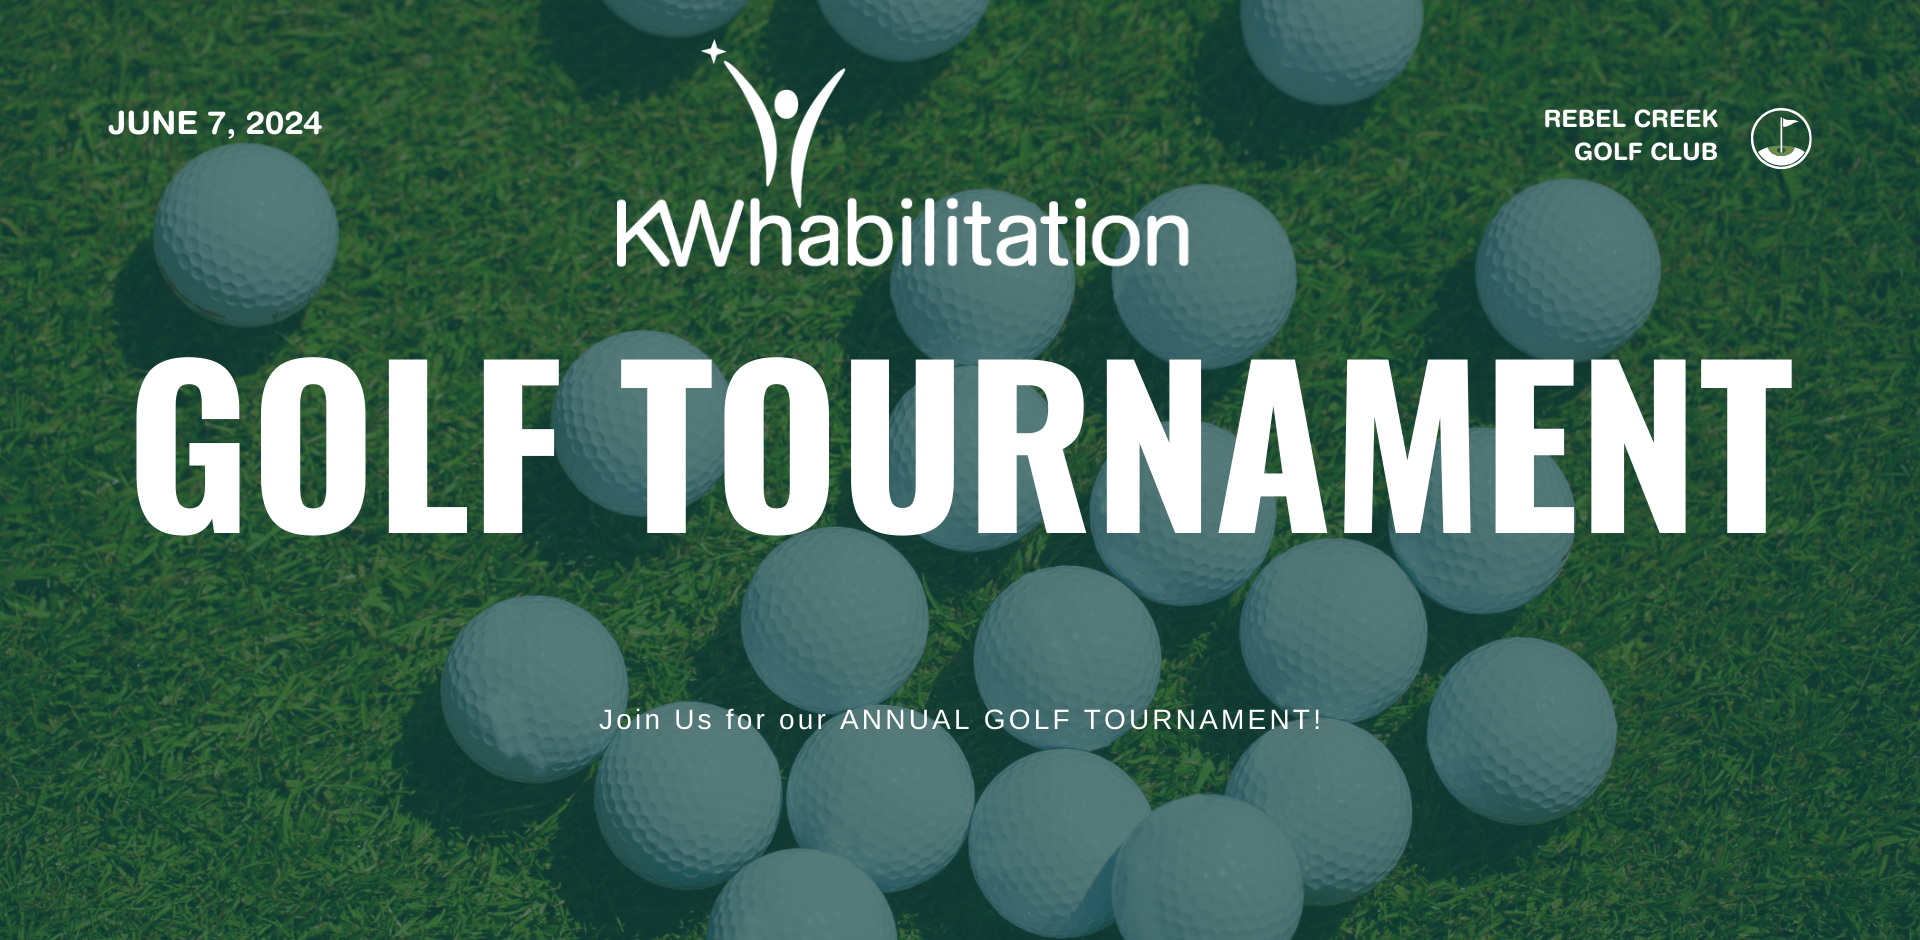 KW Habilitation Golf Tournament is being held on June 7, 2024 at Rebel Creek Golf Club. Early Bird tickets are $200, after April 15, the price is $225. visit kwhab.ca/golf for more information